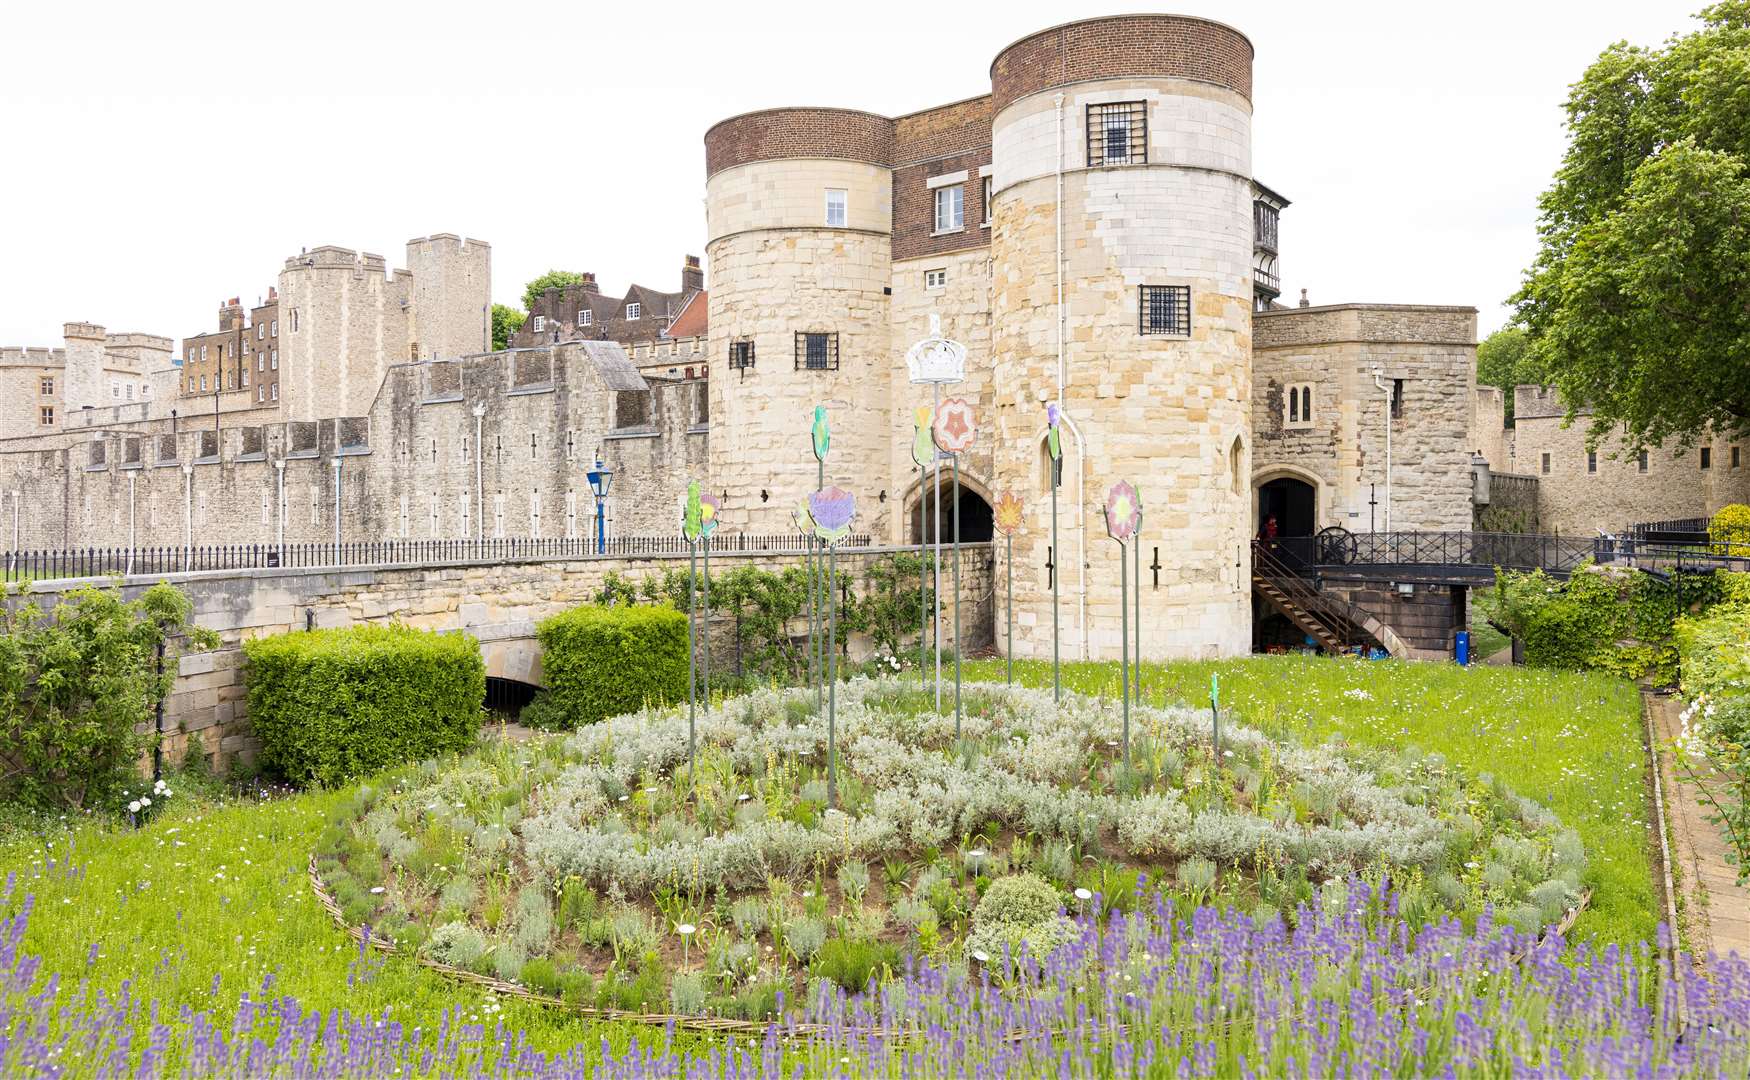 The new display is called "Superbloom" and is part of a scheme to increase biodiversity. Picture: Historic Royal Palaces